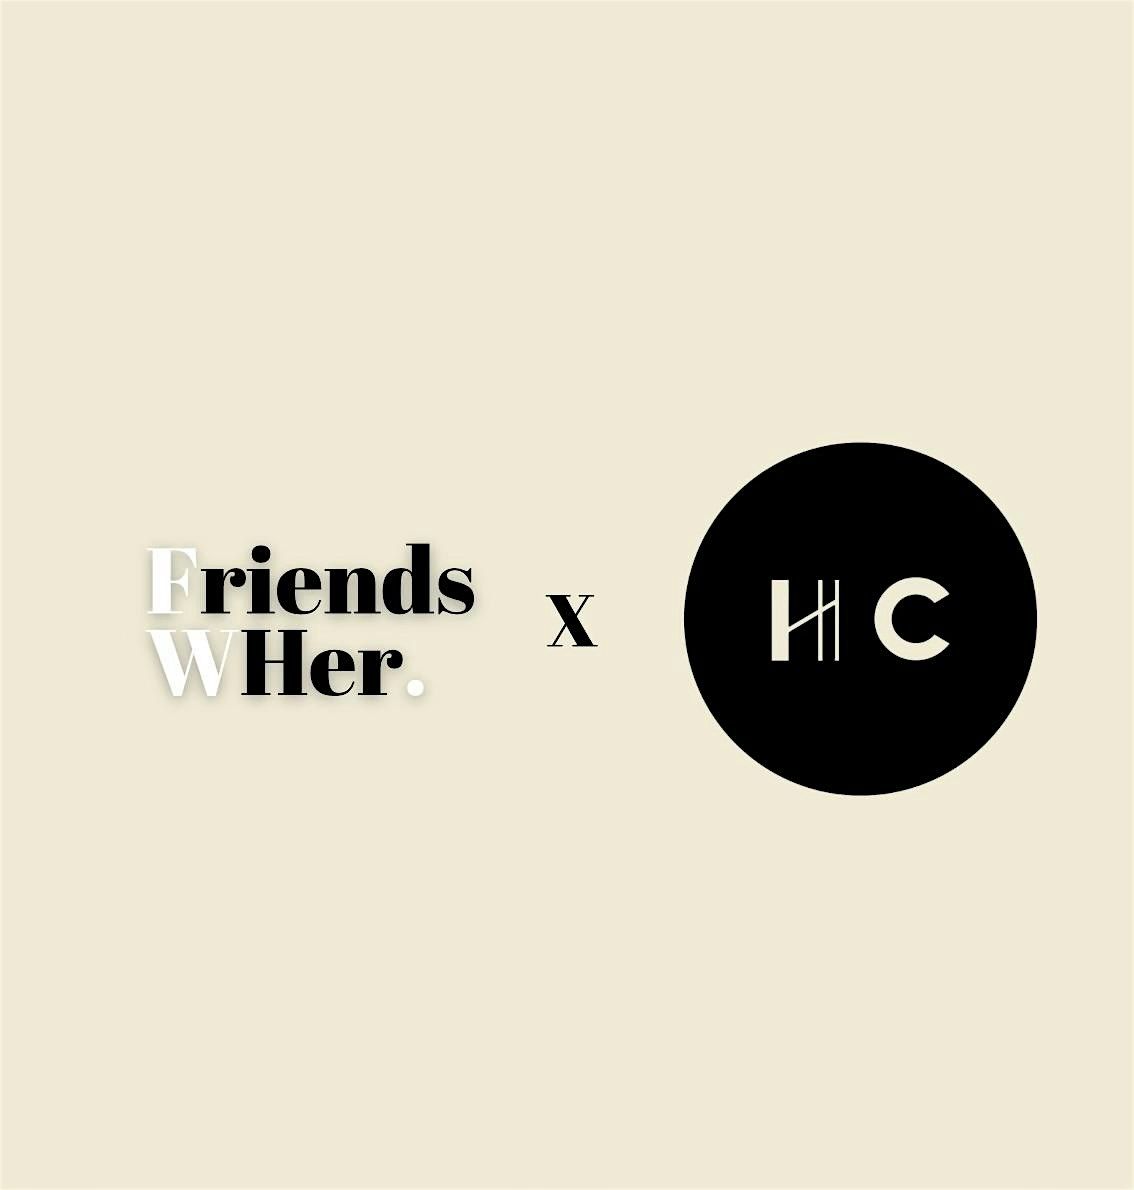 Friends with Her x HerCanberra August event